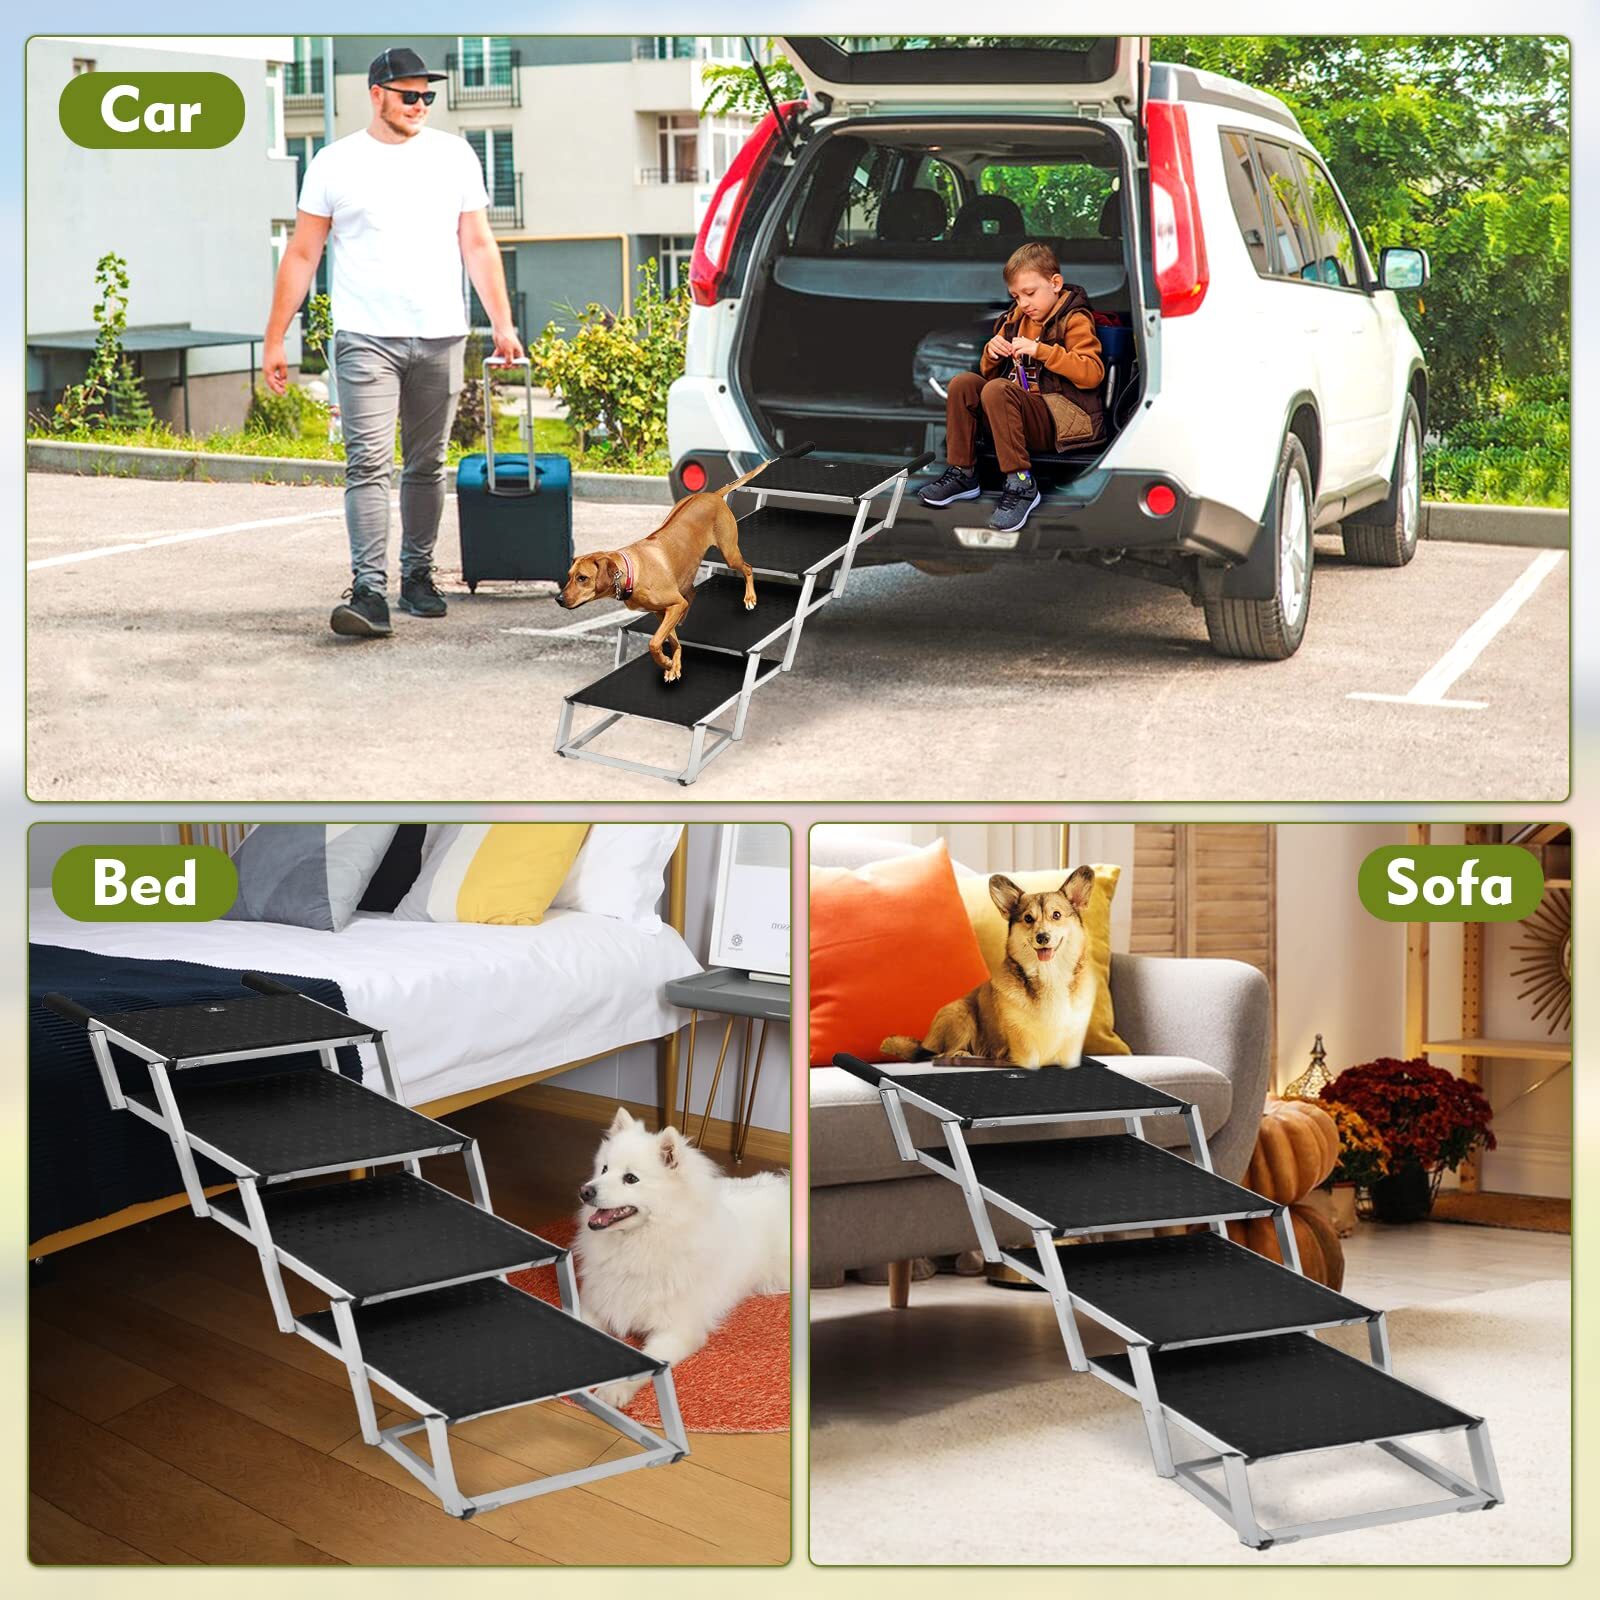 😎MAKE IT EASIER FOR YOUR DOG TO GET IN THE CAR(Buy 2 Free Shipping)⭐⭐⭐⭐⭐